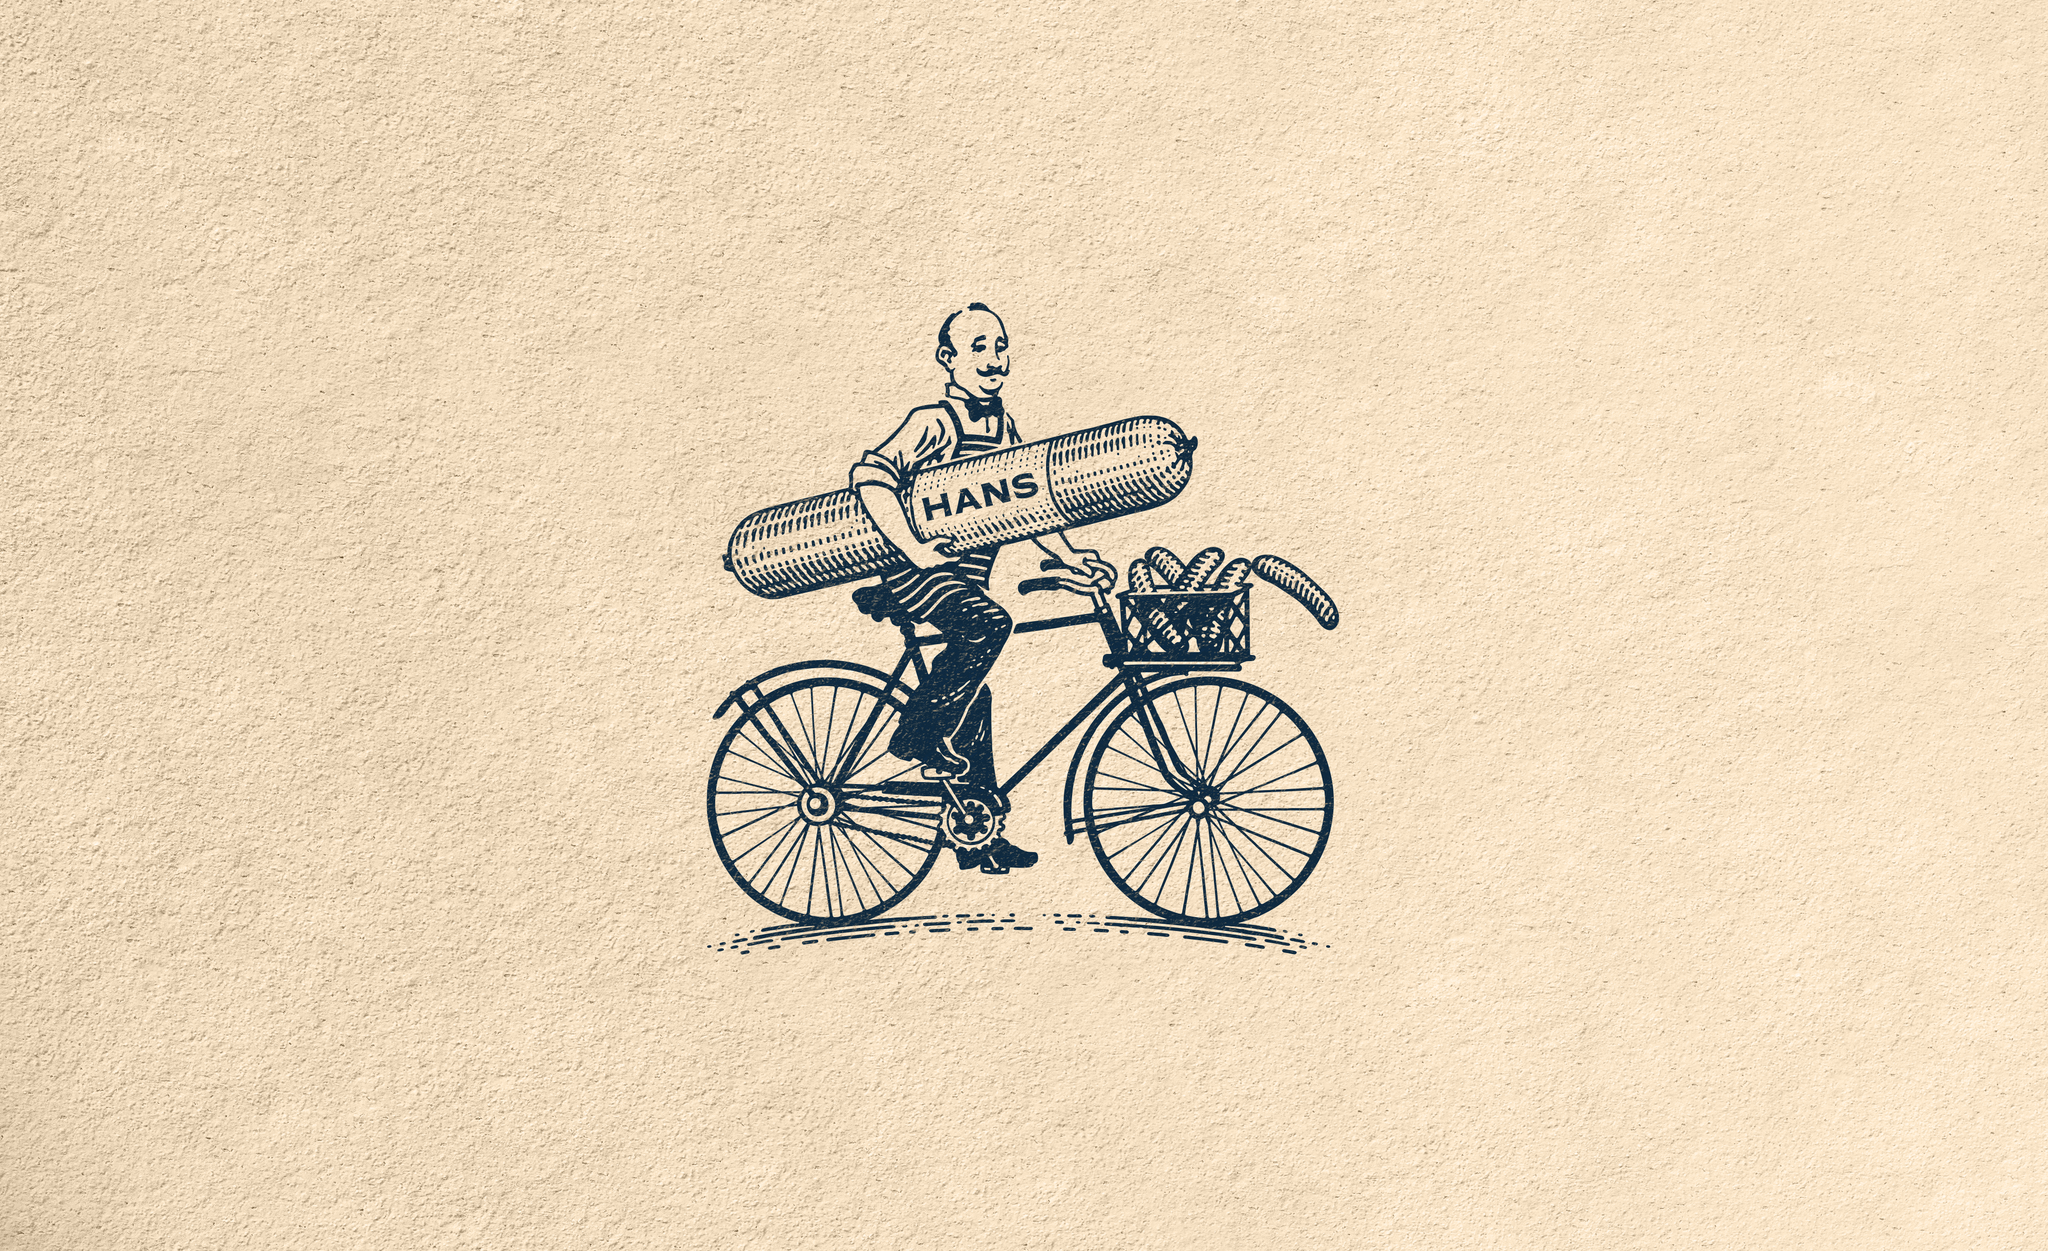 Hans rebrand by brand design agency Our Revolution featuring vintage navy ink illustration on textured paper showing a man on a bicycle holding a roll of Hans salami